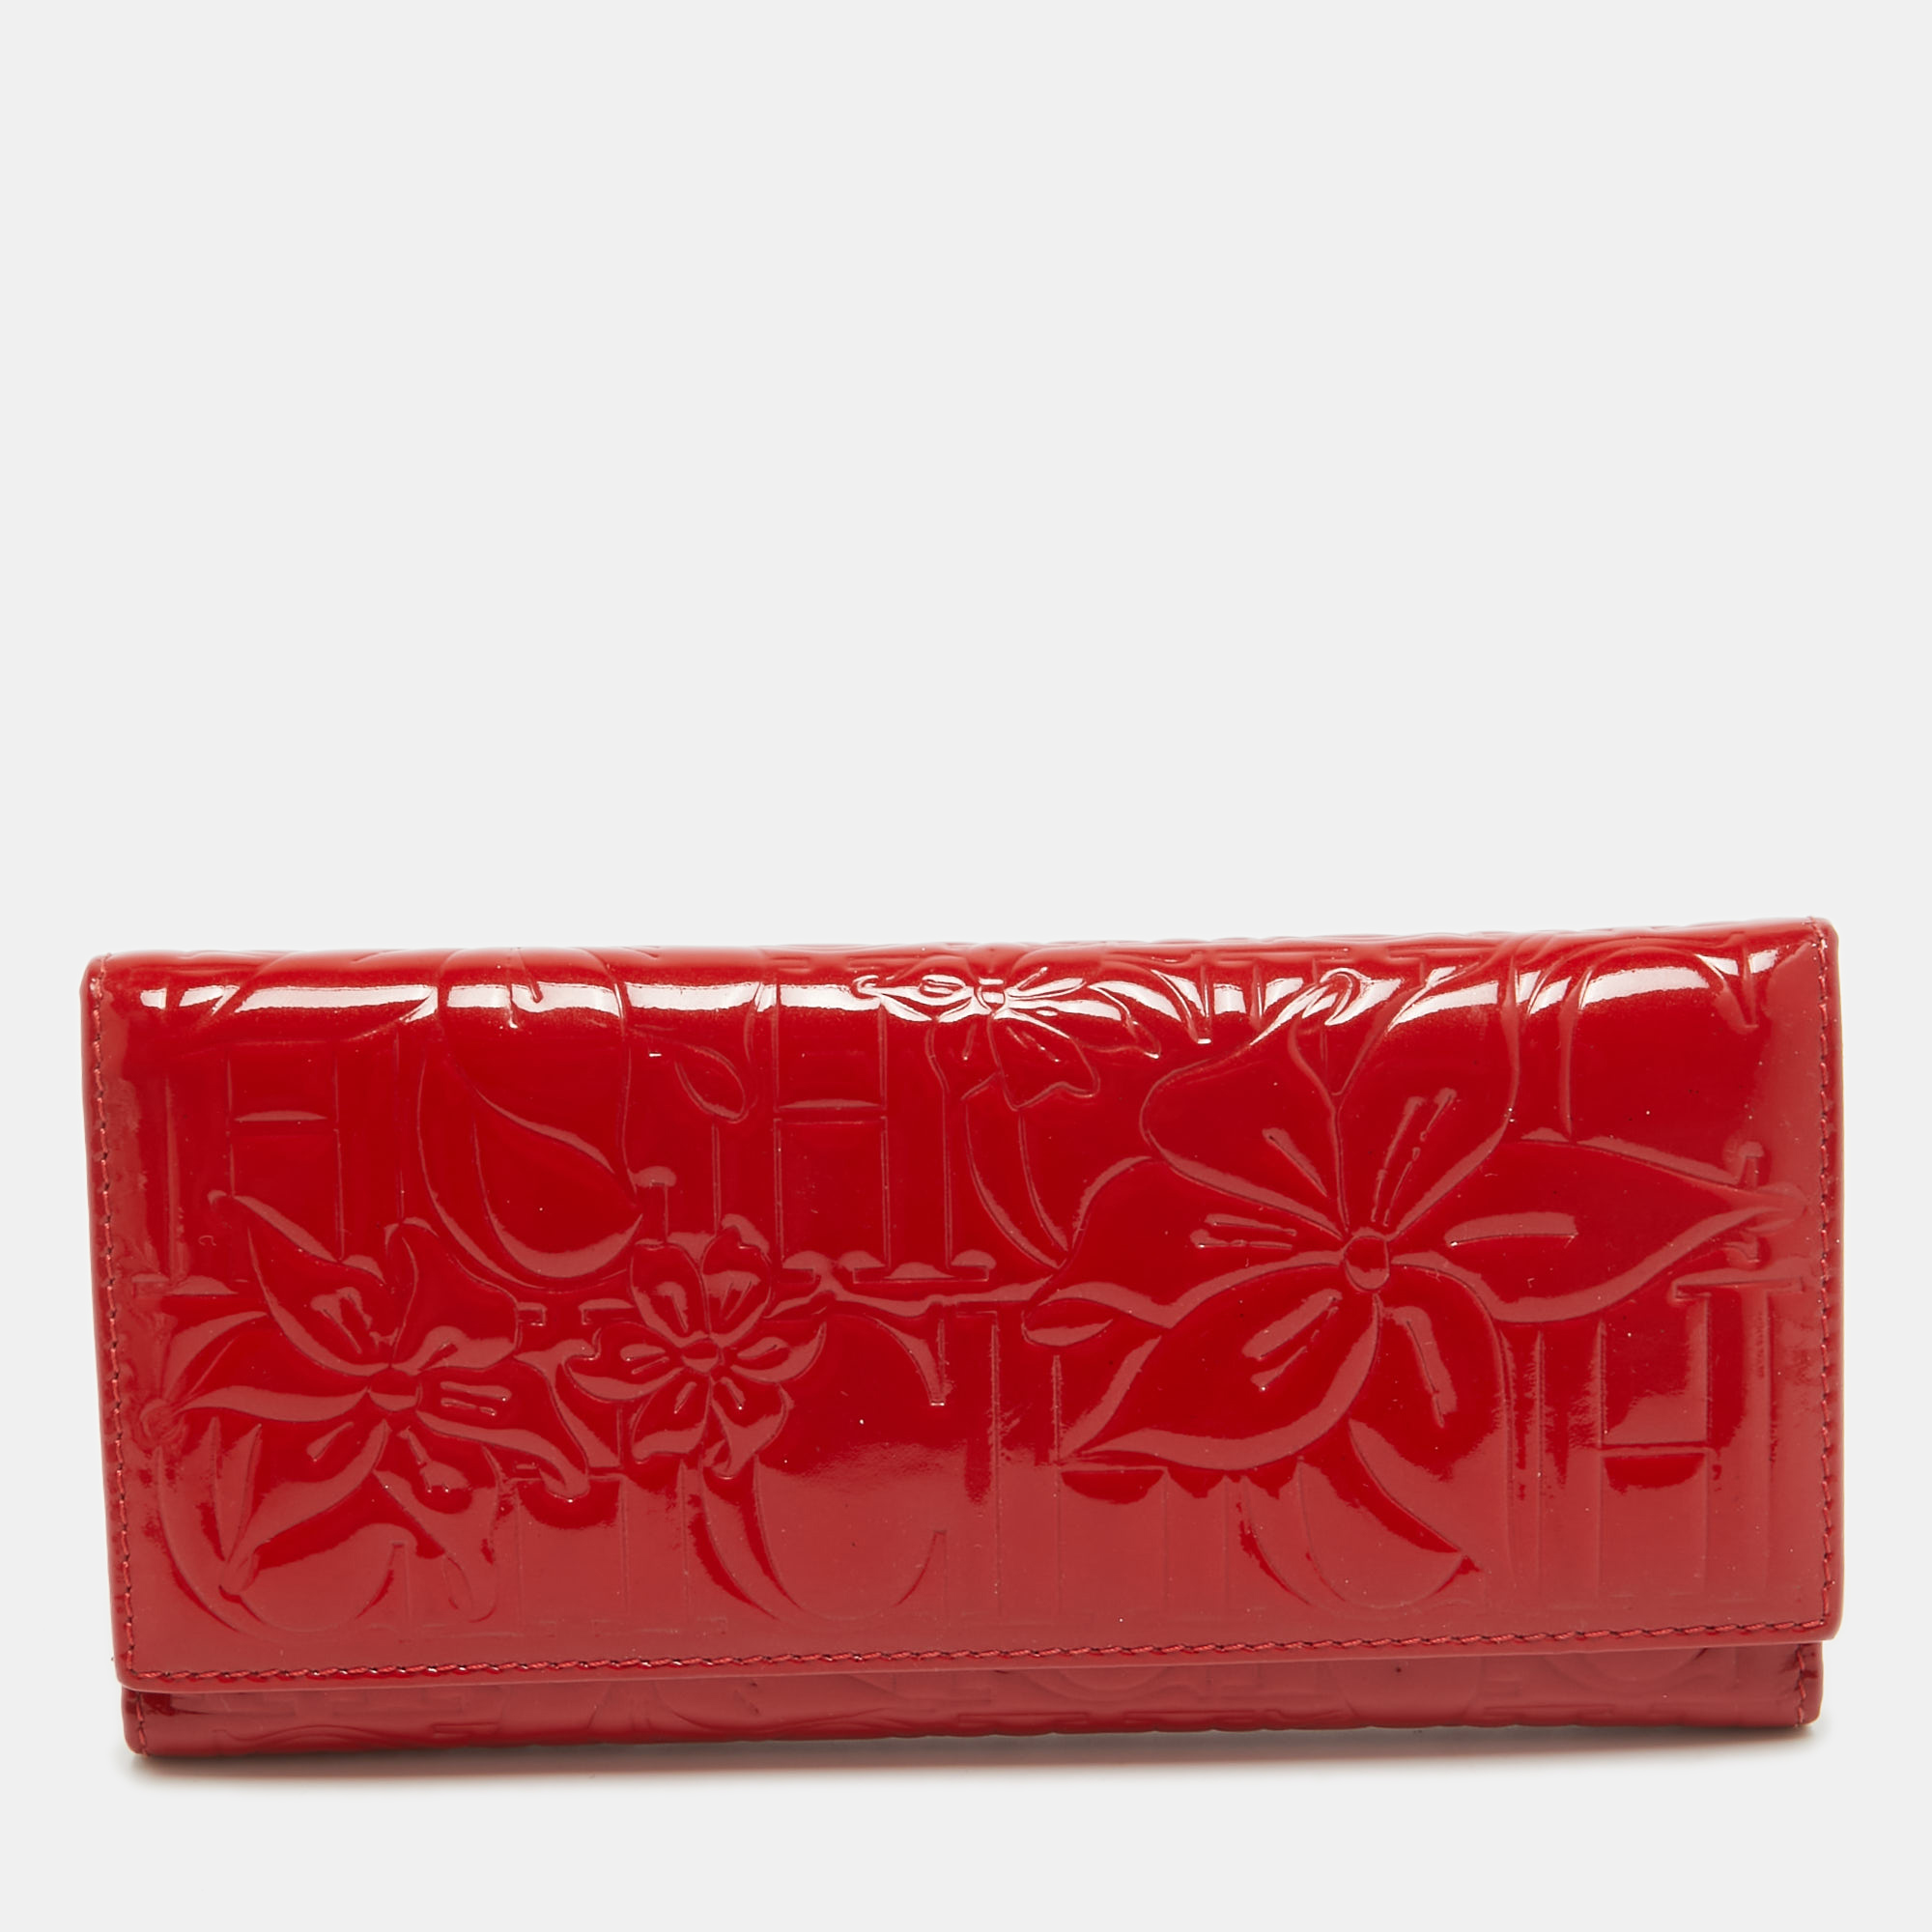 Pre-owned Carolina Herrera Red Embossed Patent Leather Flap Continental Wallet